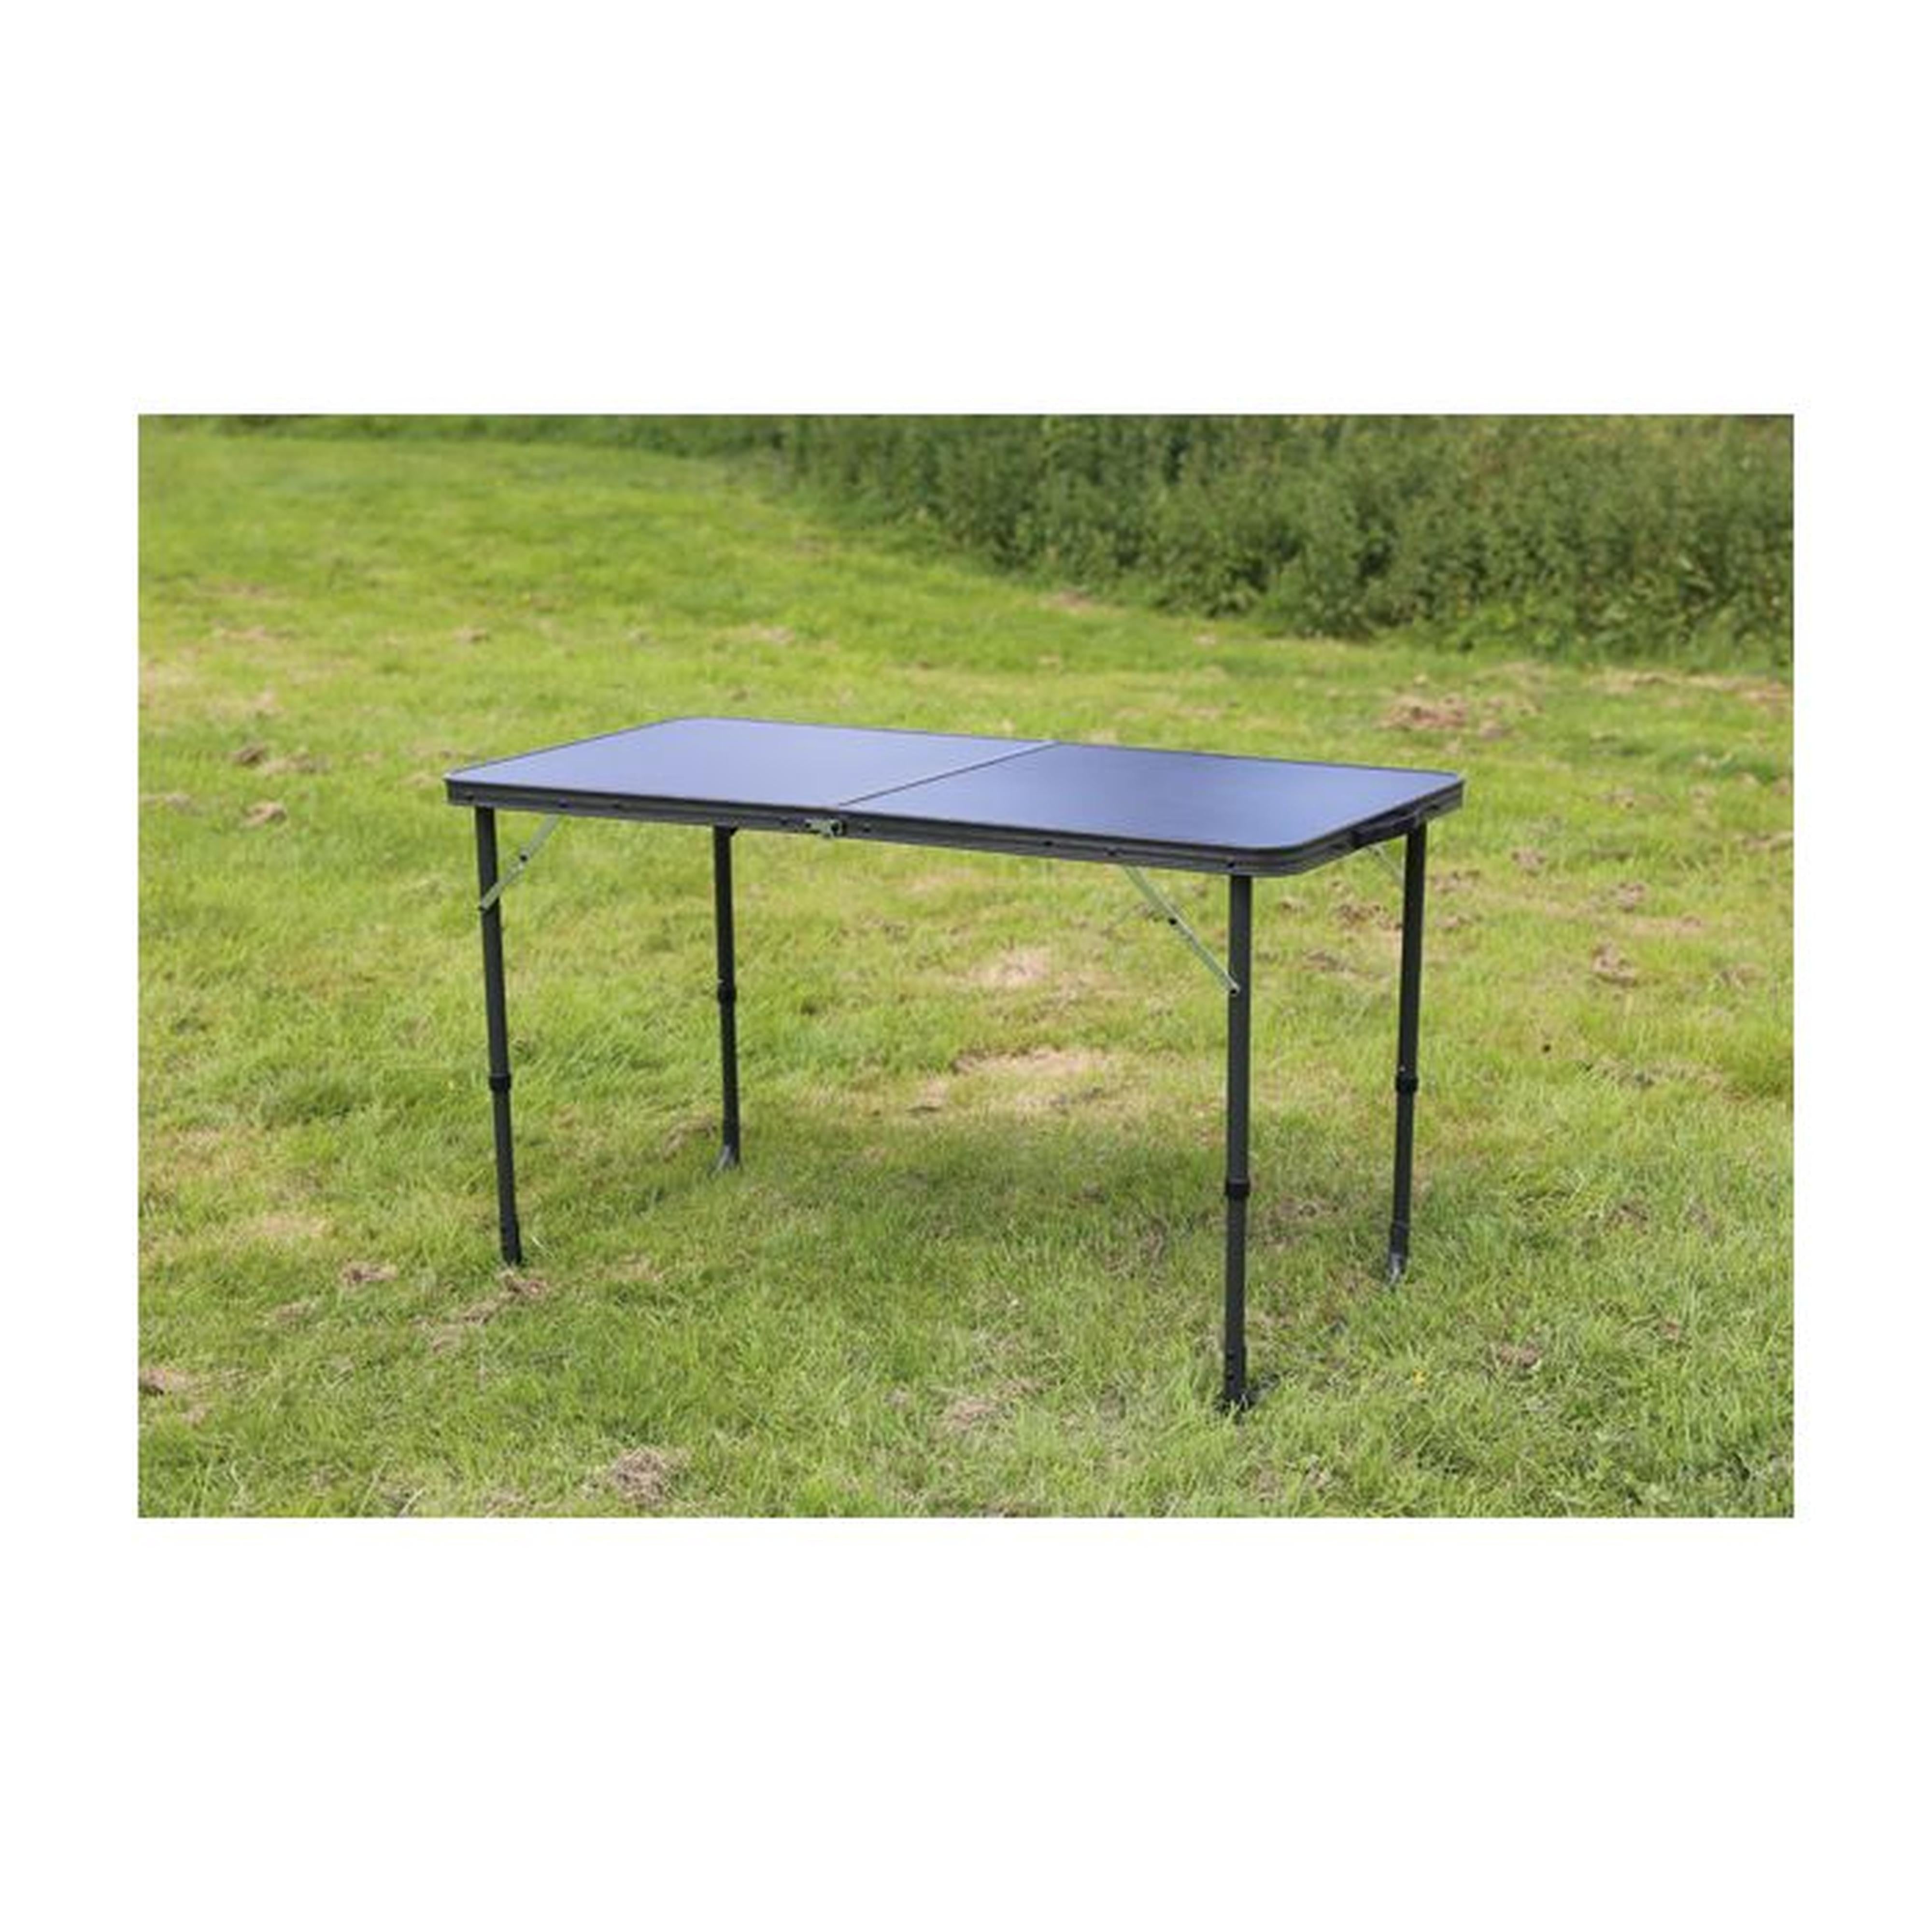 Quest Superlite Stow folding camping table